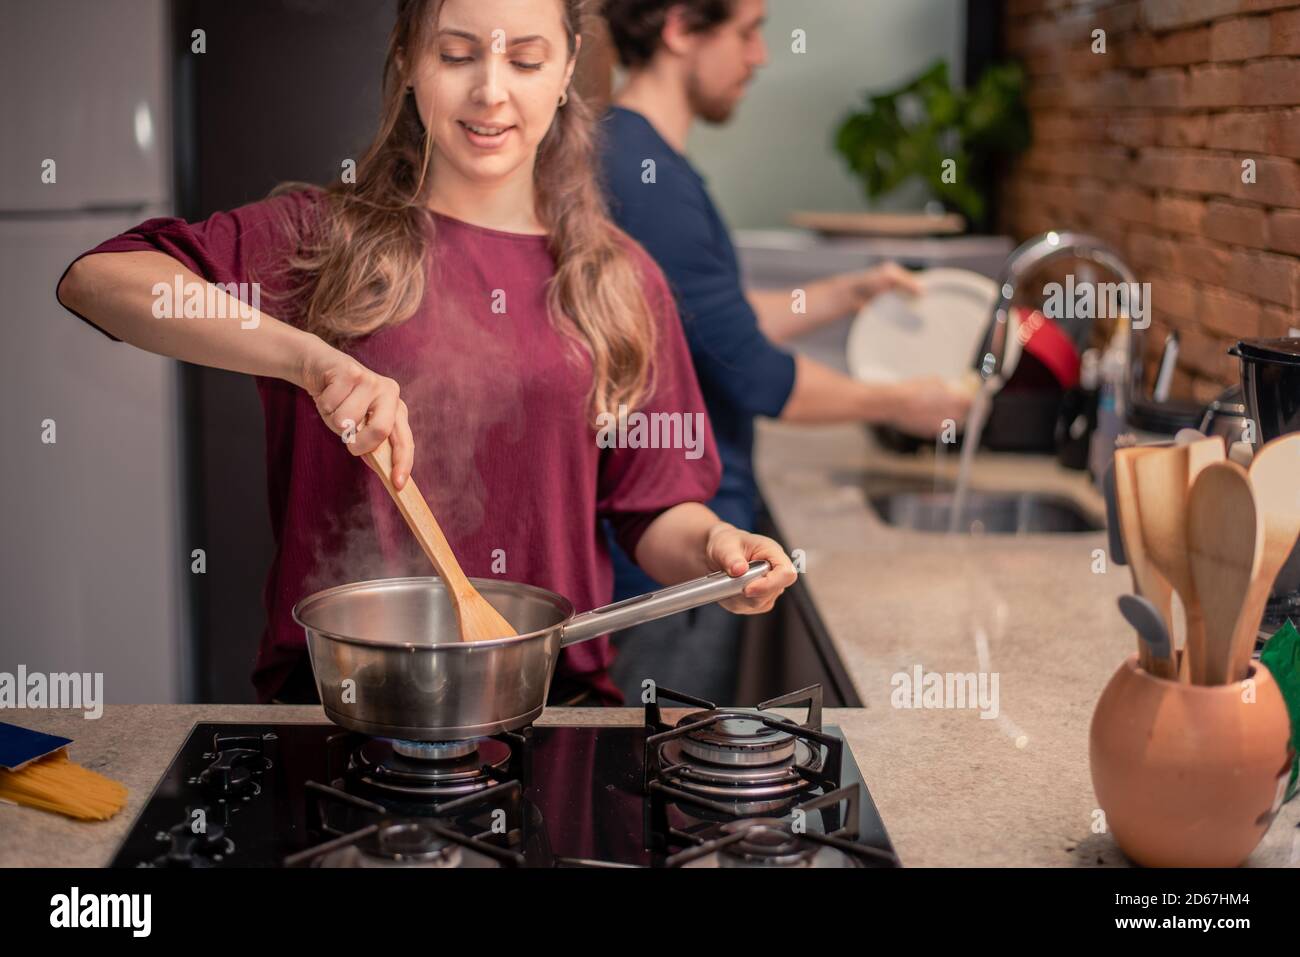 Couple preparing meal and washing dishes Stock Photo